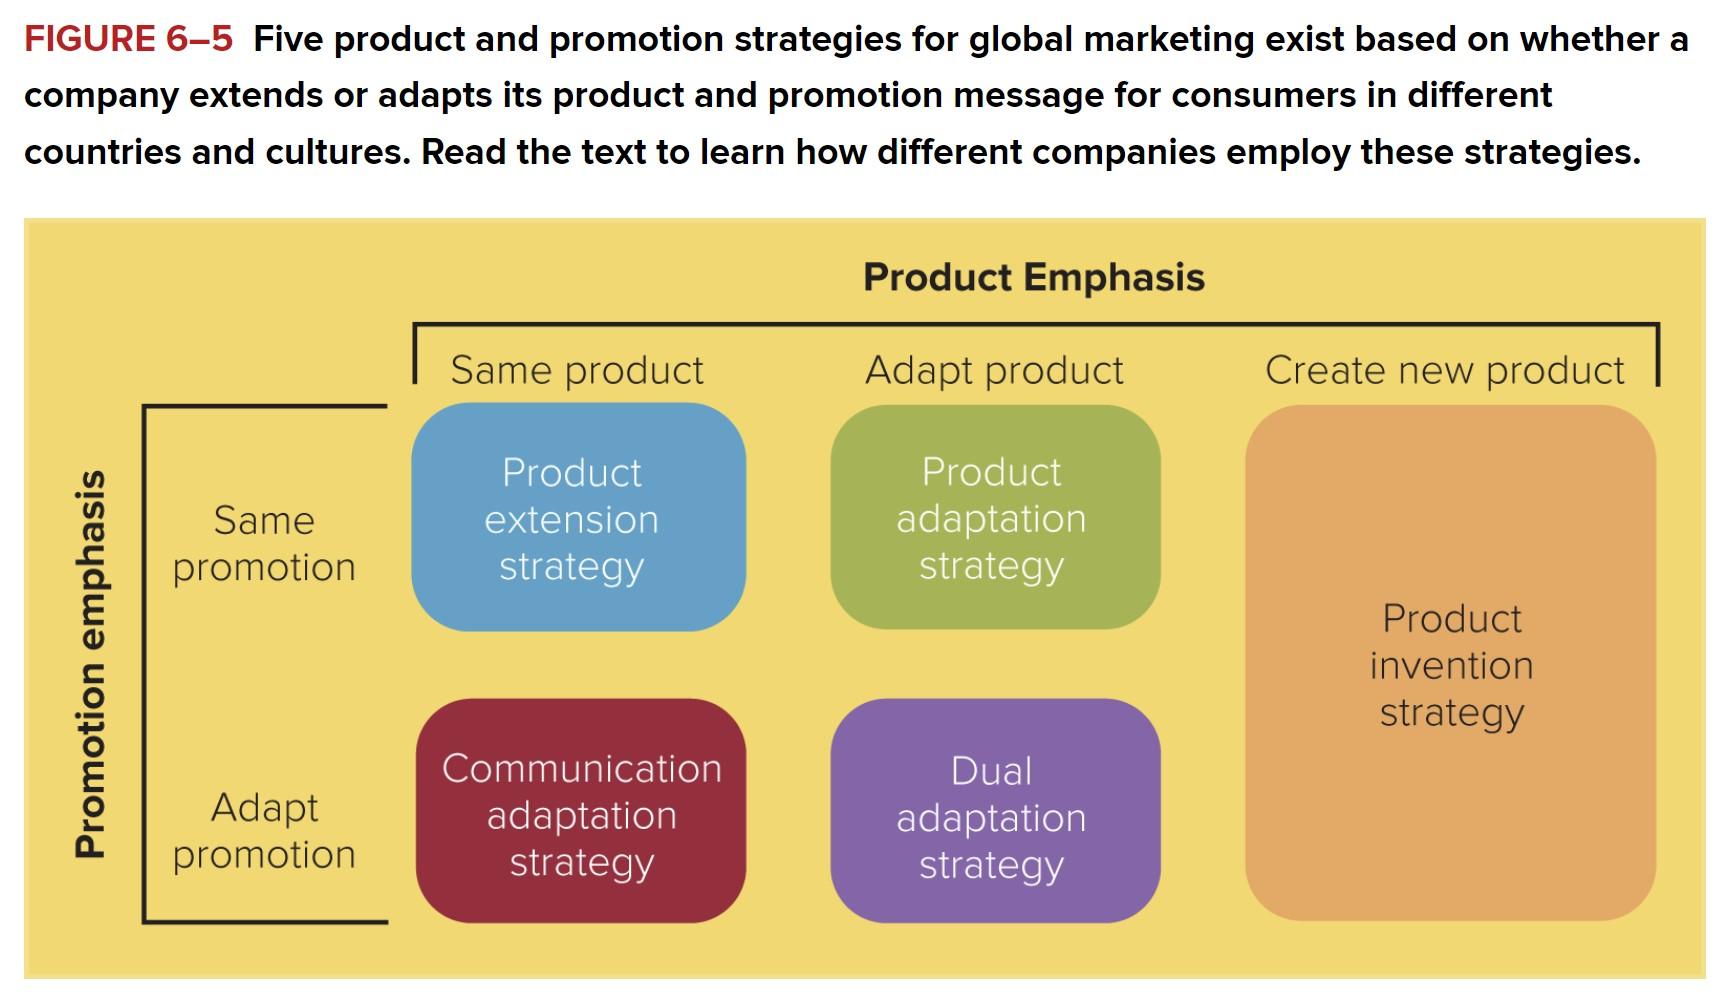 FIGURE 6-5 Five product and promotion strategies for global marketing exist based on whether a company